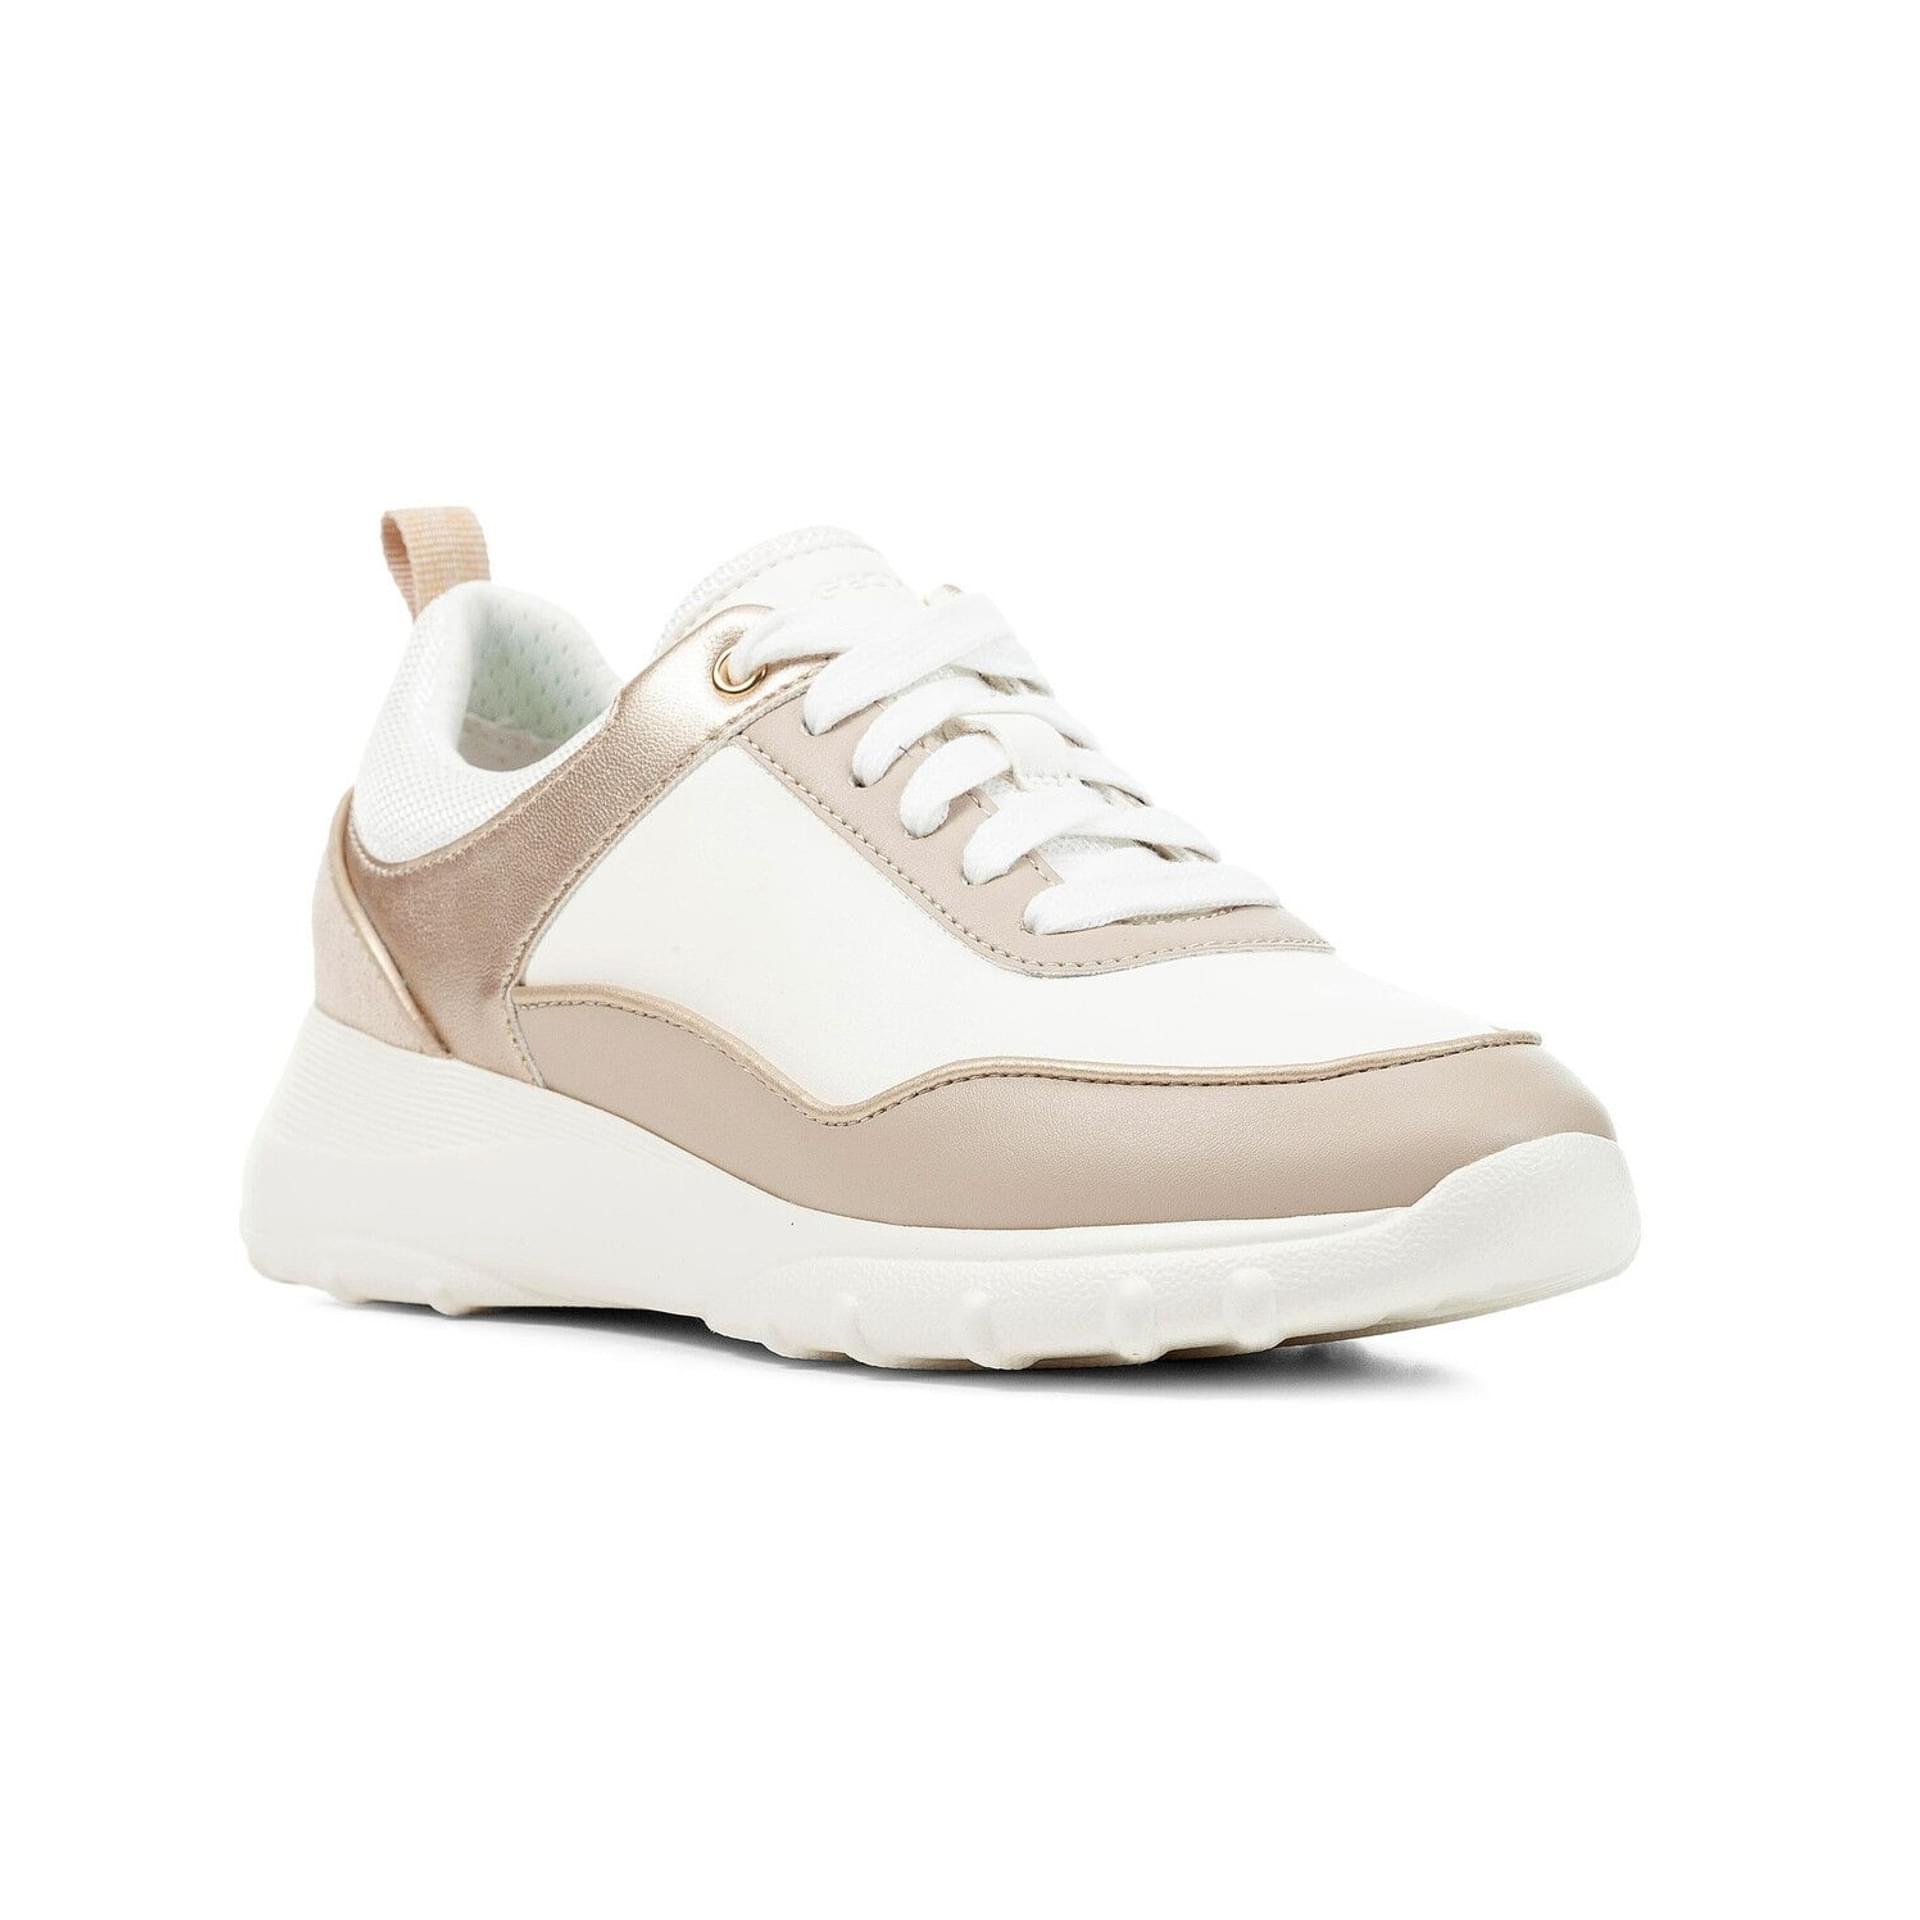 Geox Alleniee Sneakers D35LPB_00054 in Light Taupe/Off White